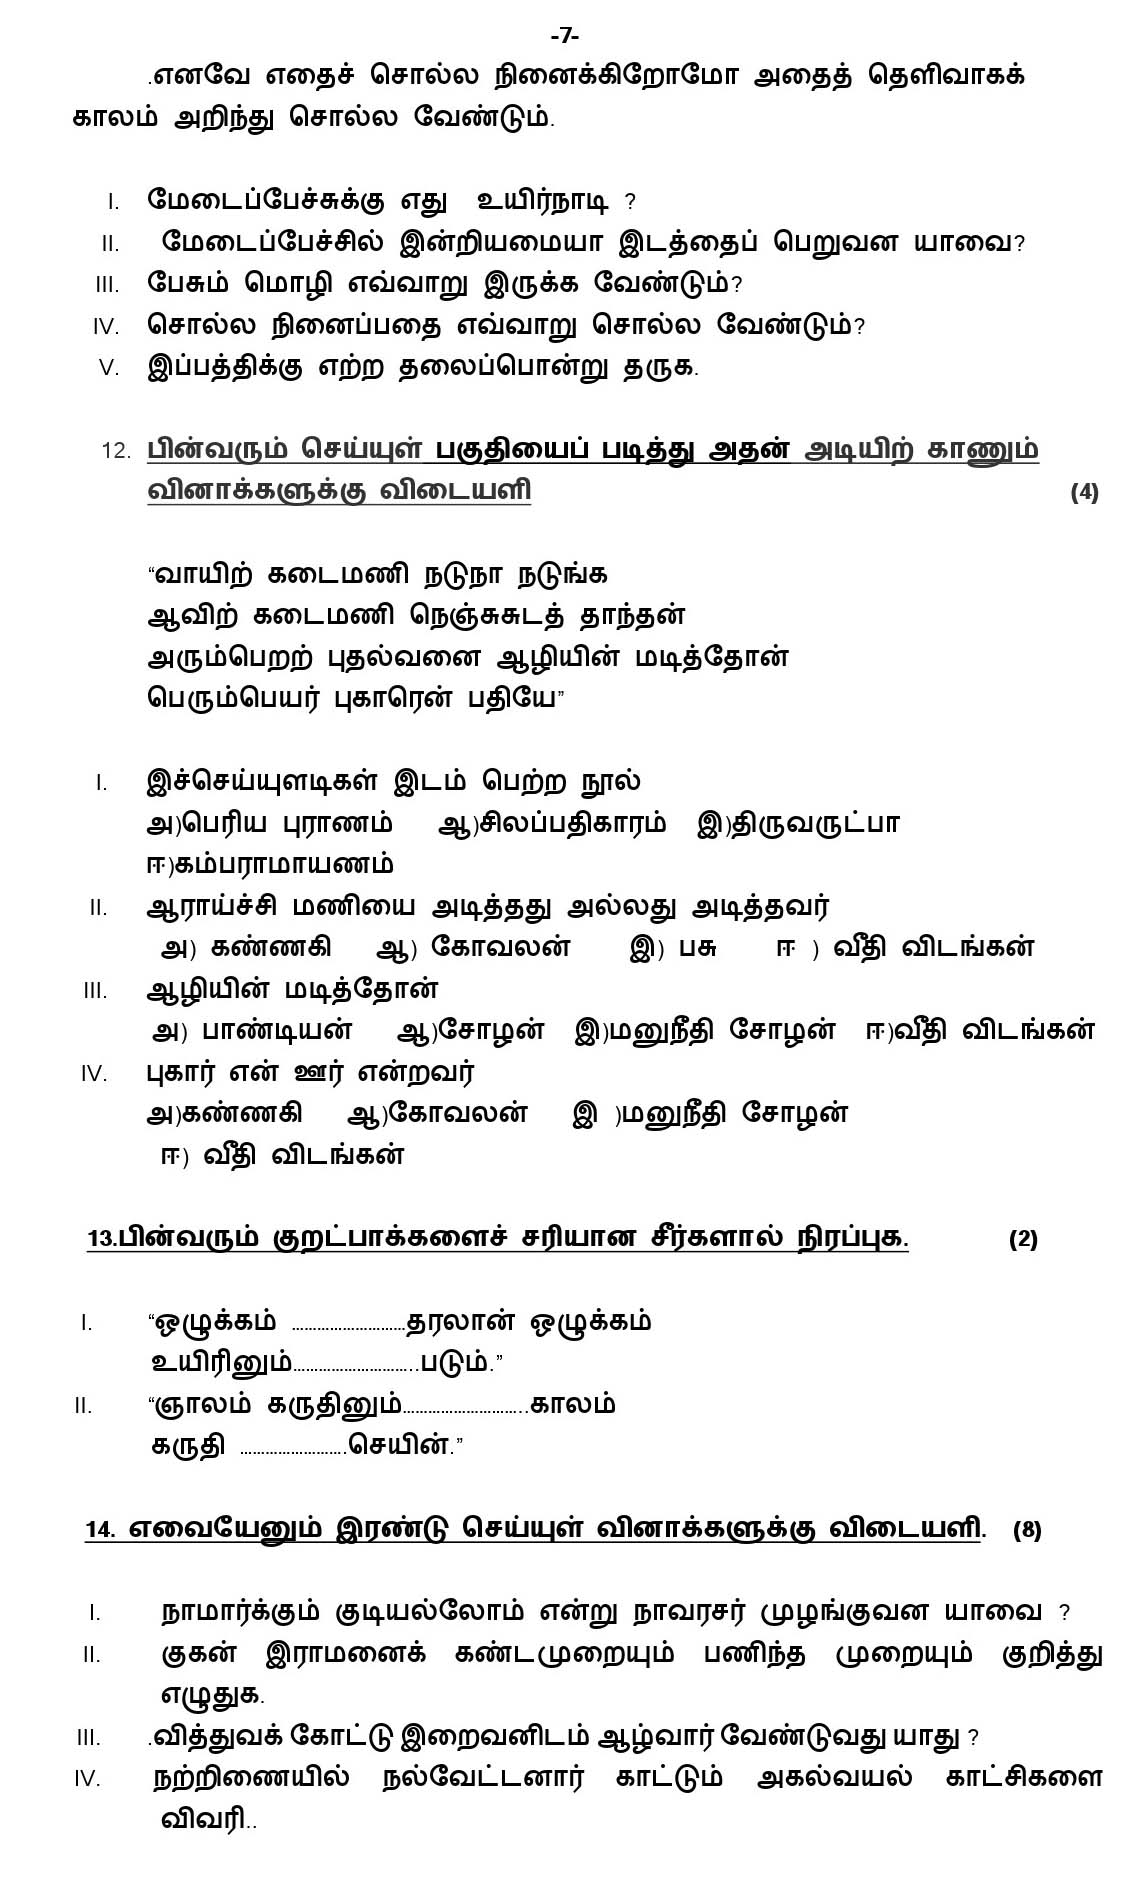 Tamil CBSE Class X Sample Question Paper 2018-19 - Image 7